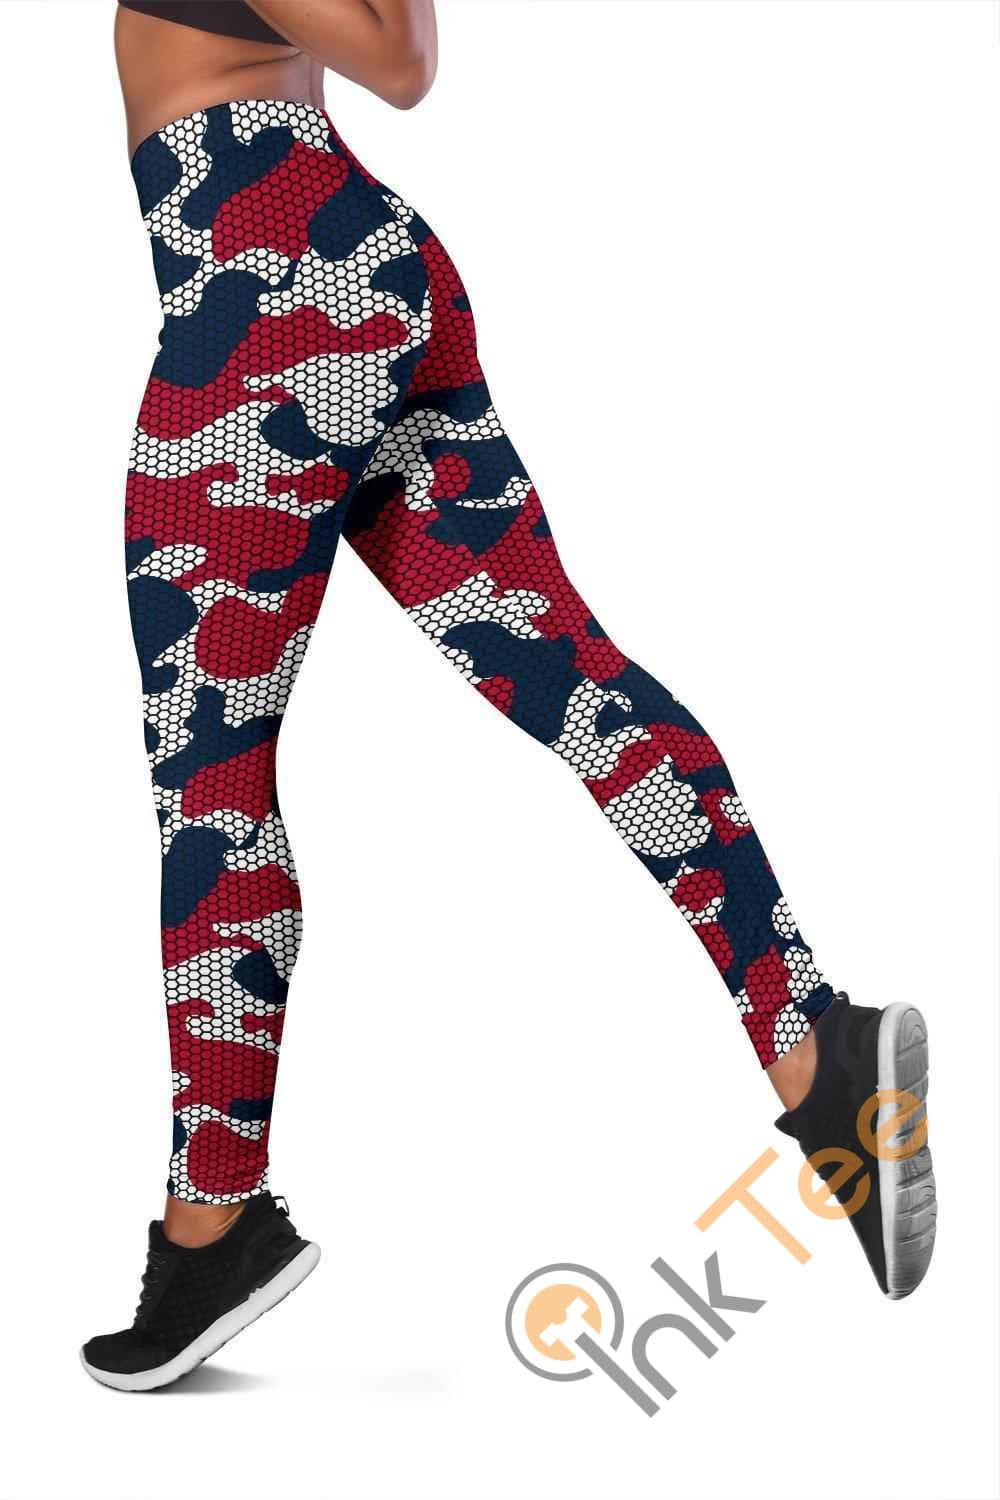 Inktee Store - New England Patriots Inspired Hex Camo 3D All Over Print For Yoga Fitness Fashion Women'S Leggings Image